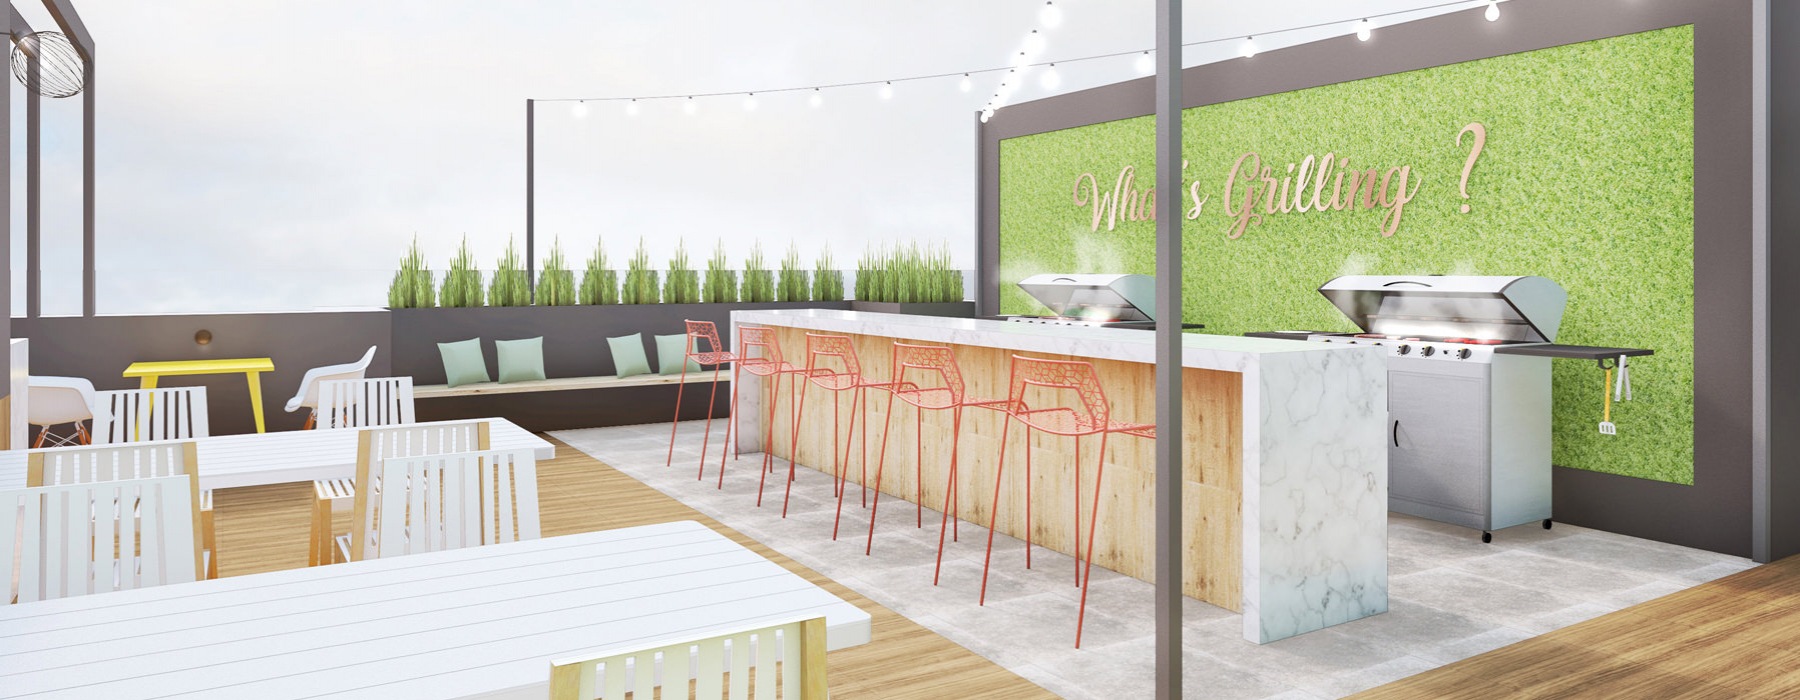 Rendering of Rooftop Lounge and Grilling Area